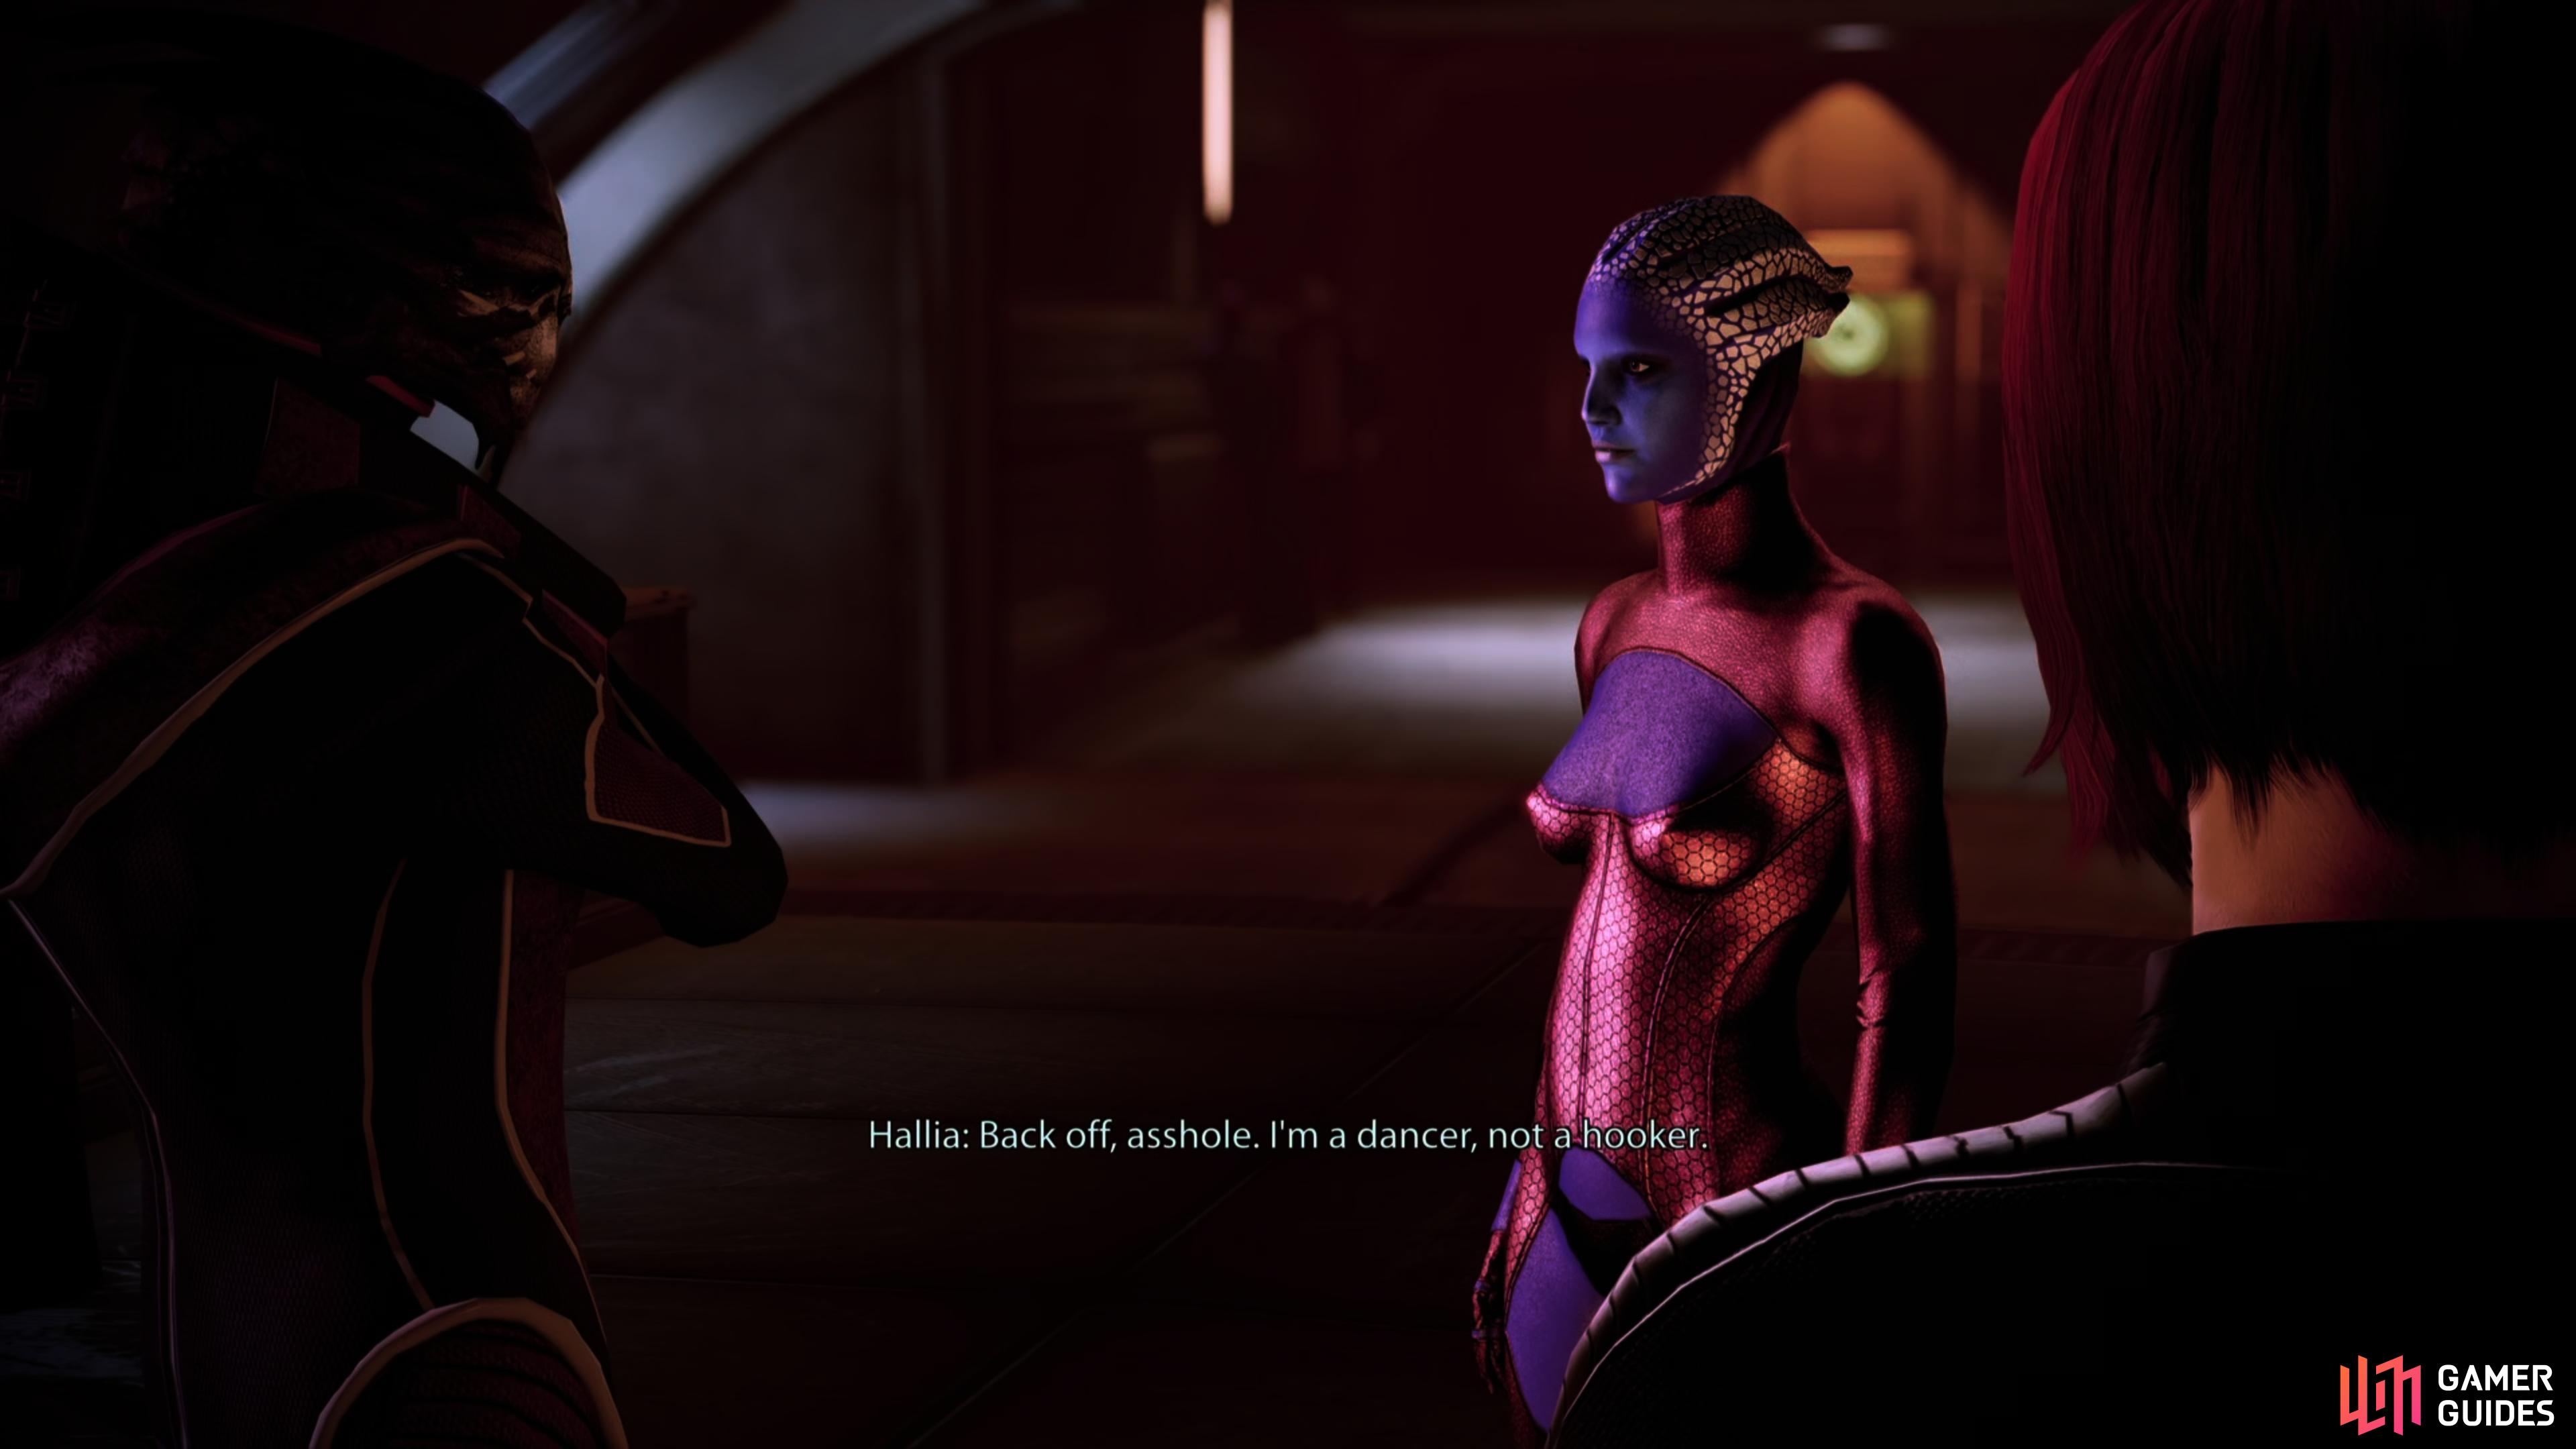 If your taste for violence isn't sated yet, you can beat up a turian aggressively pursuing a dancer,